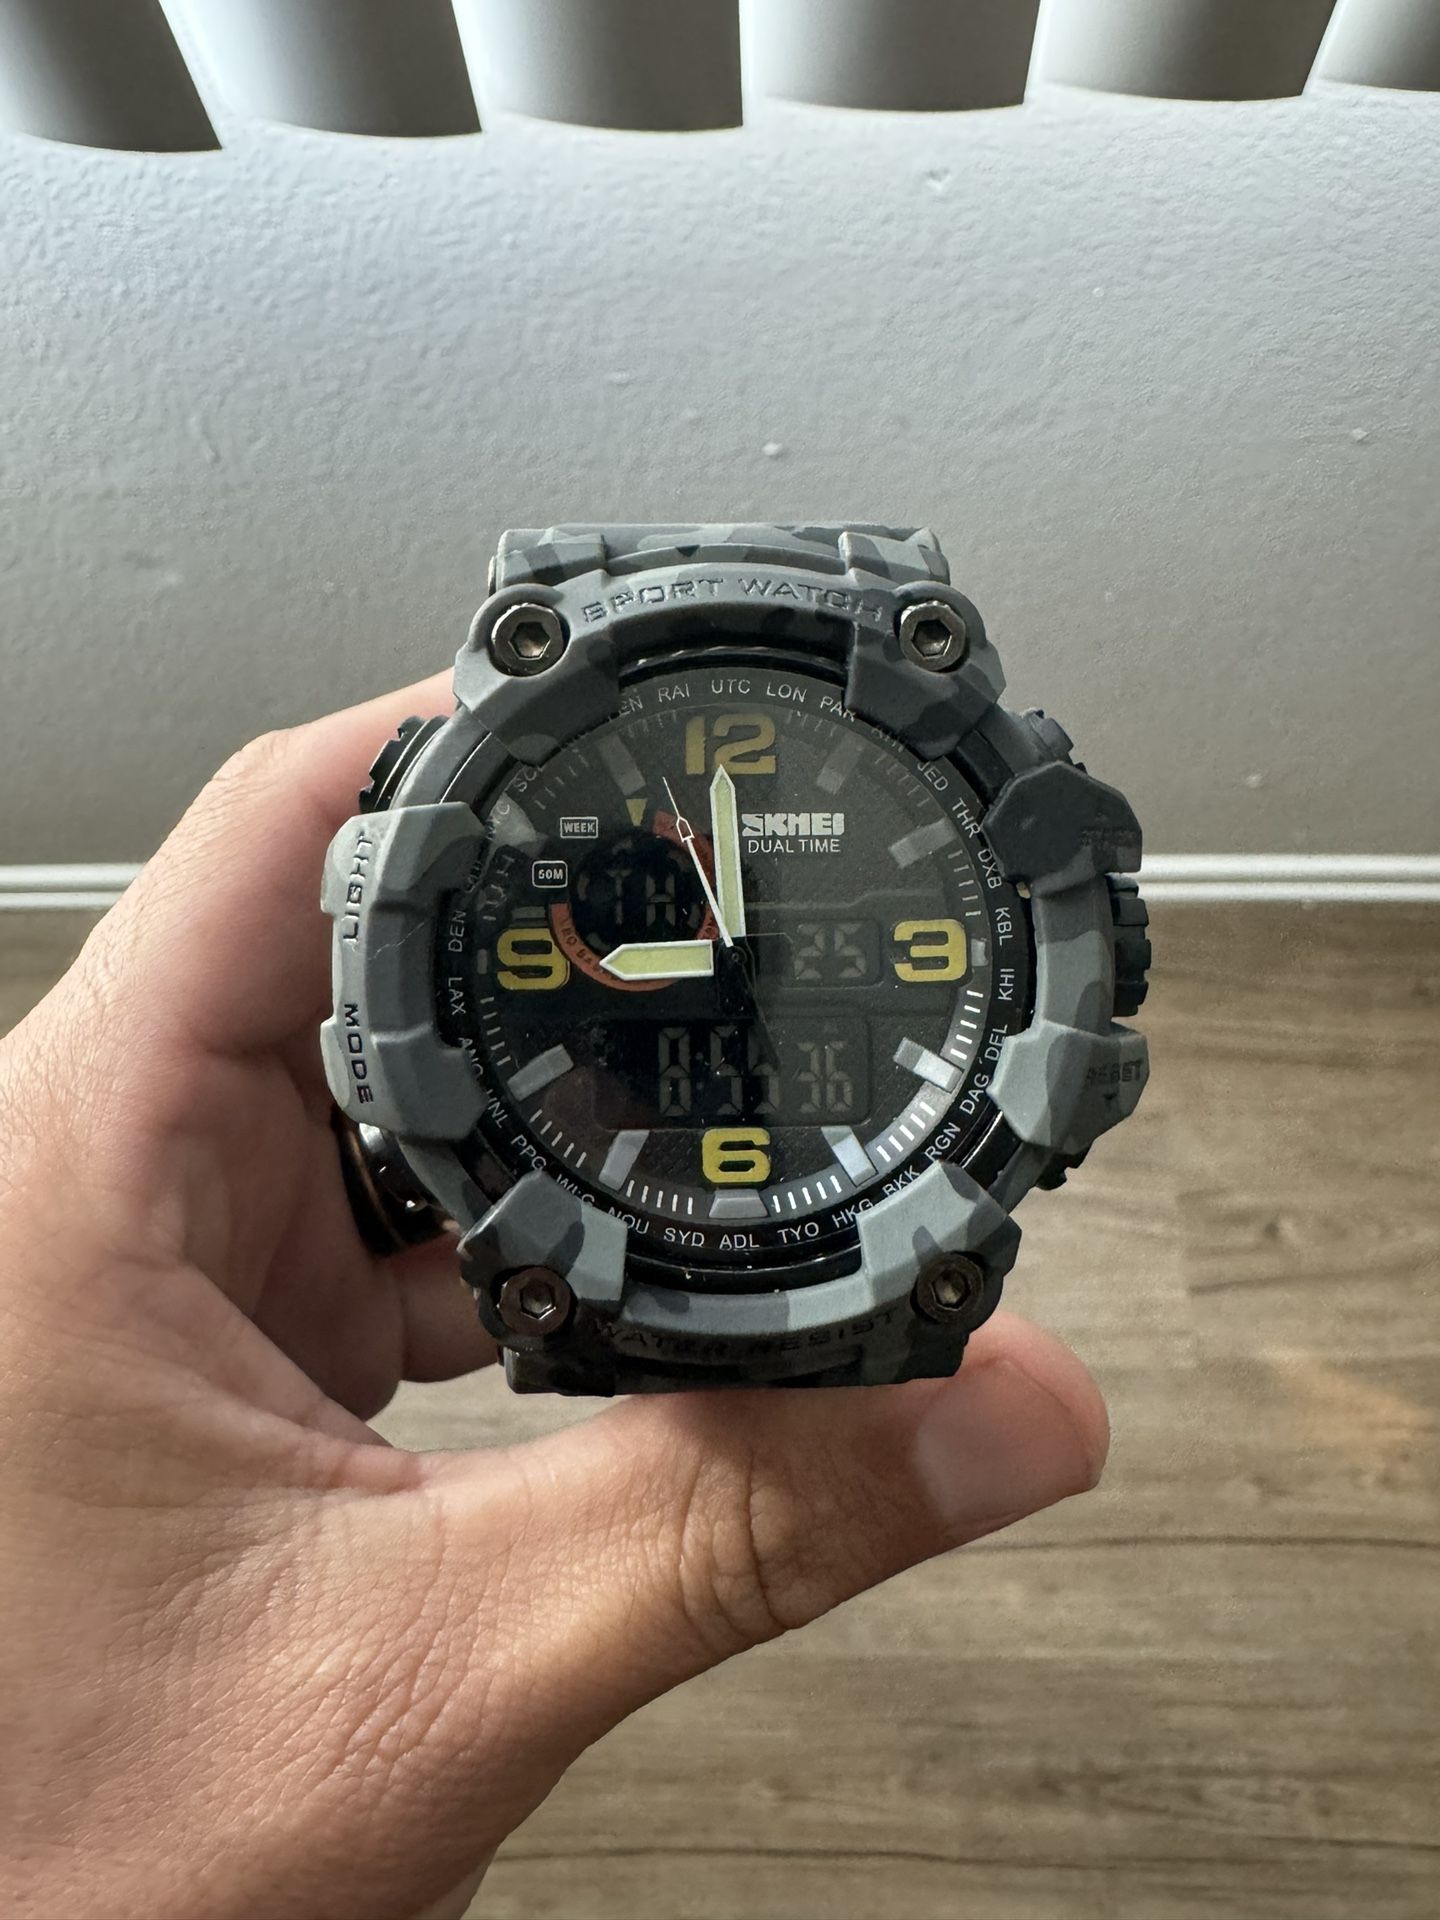 Tactical watch